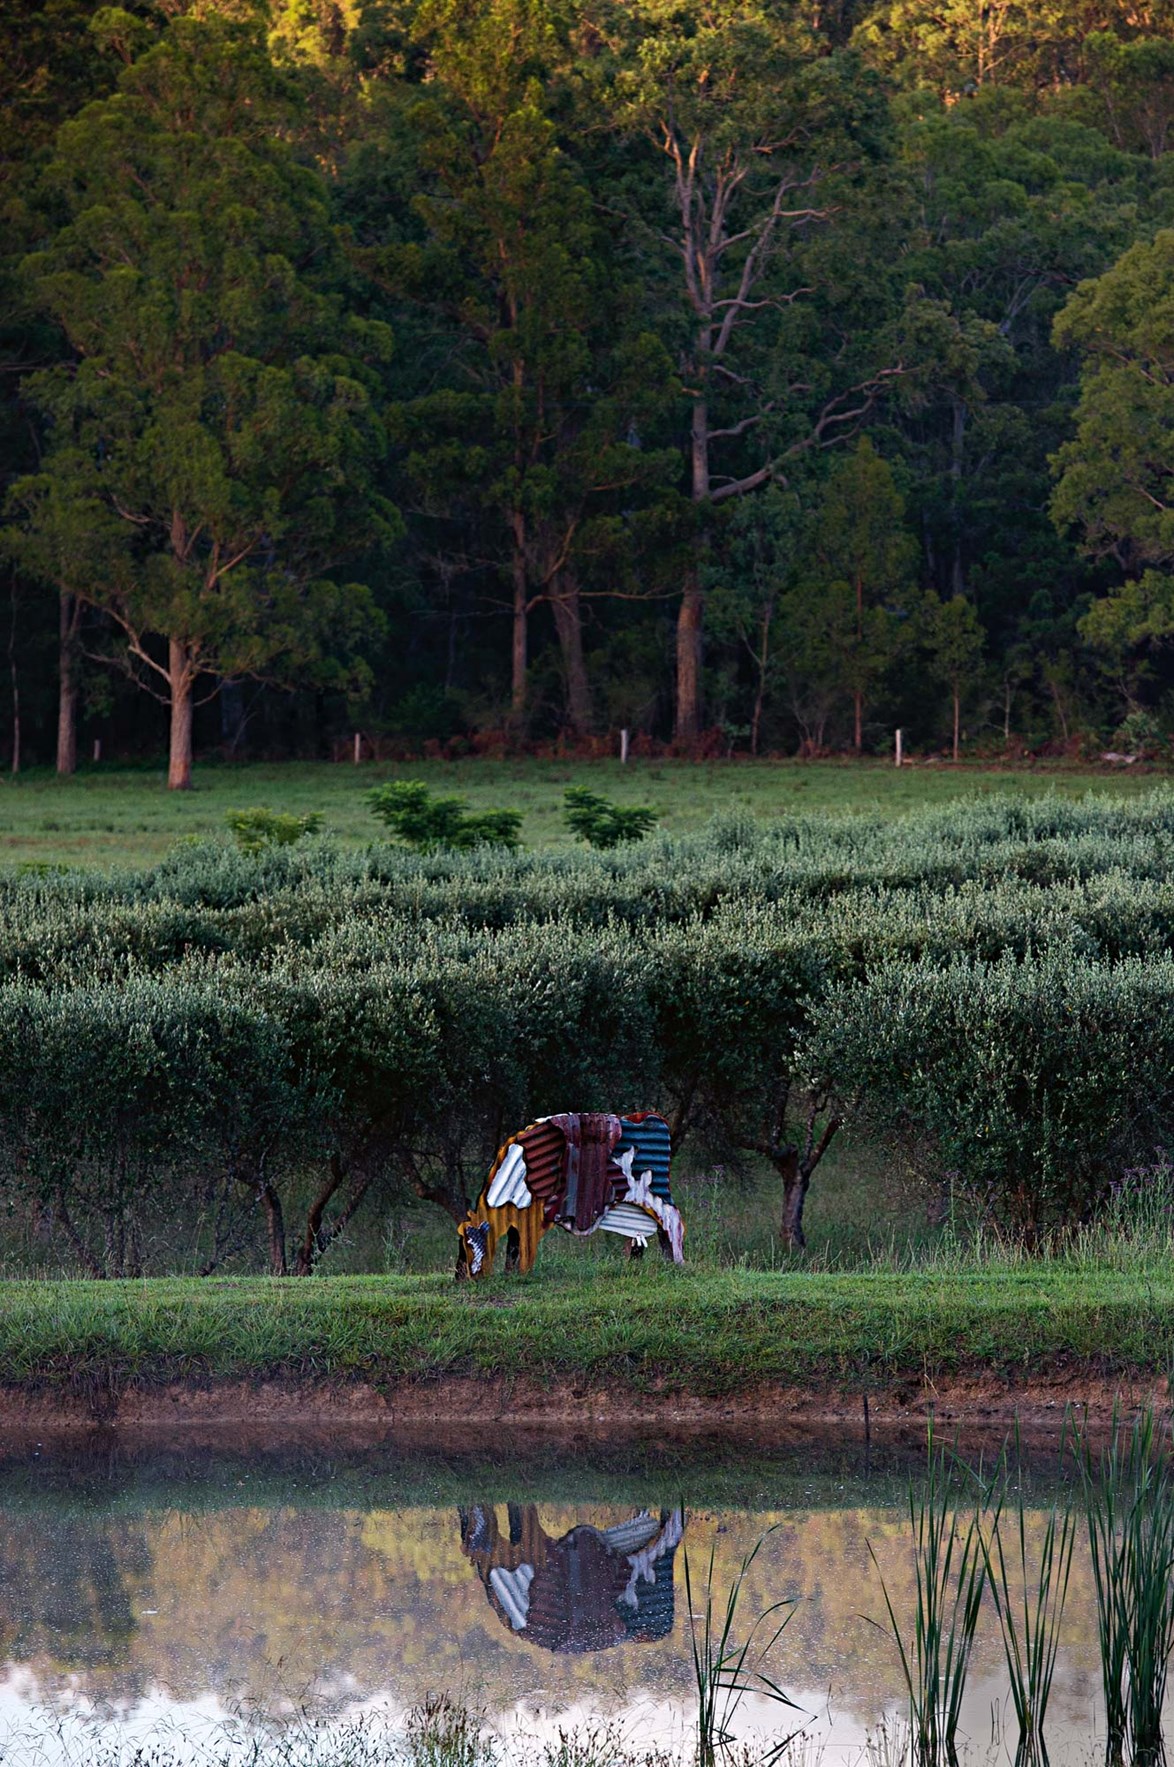 A corrugated iron sculpture by New Zealand artist Jeff Thomson is reflected in a pond on a [farming property in the Hunter Valley](https://www.homestolove.com.au/australian-farmhouse-design-13830|target="_blank").  Jeff's work has featured all around Australia, most notably at Canberra Airport wherethree large corrugated iron kangaroos stand at the end of the runway.